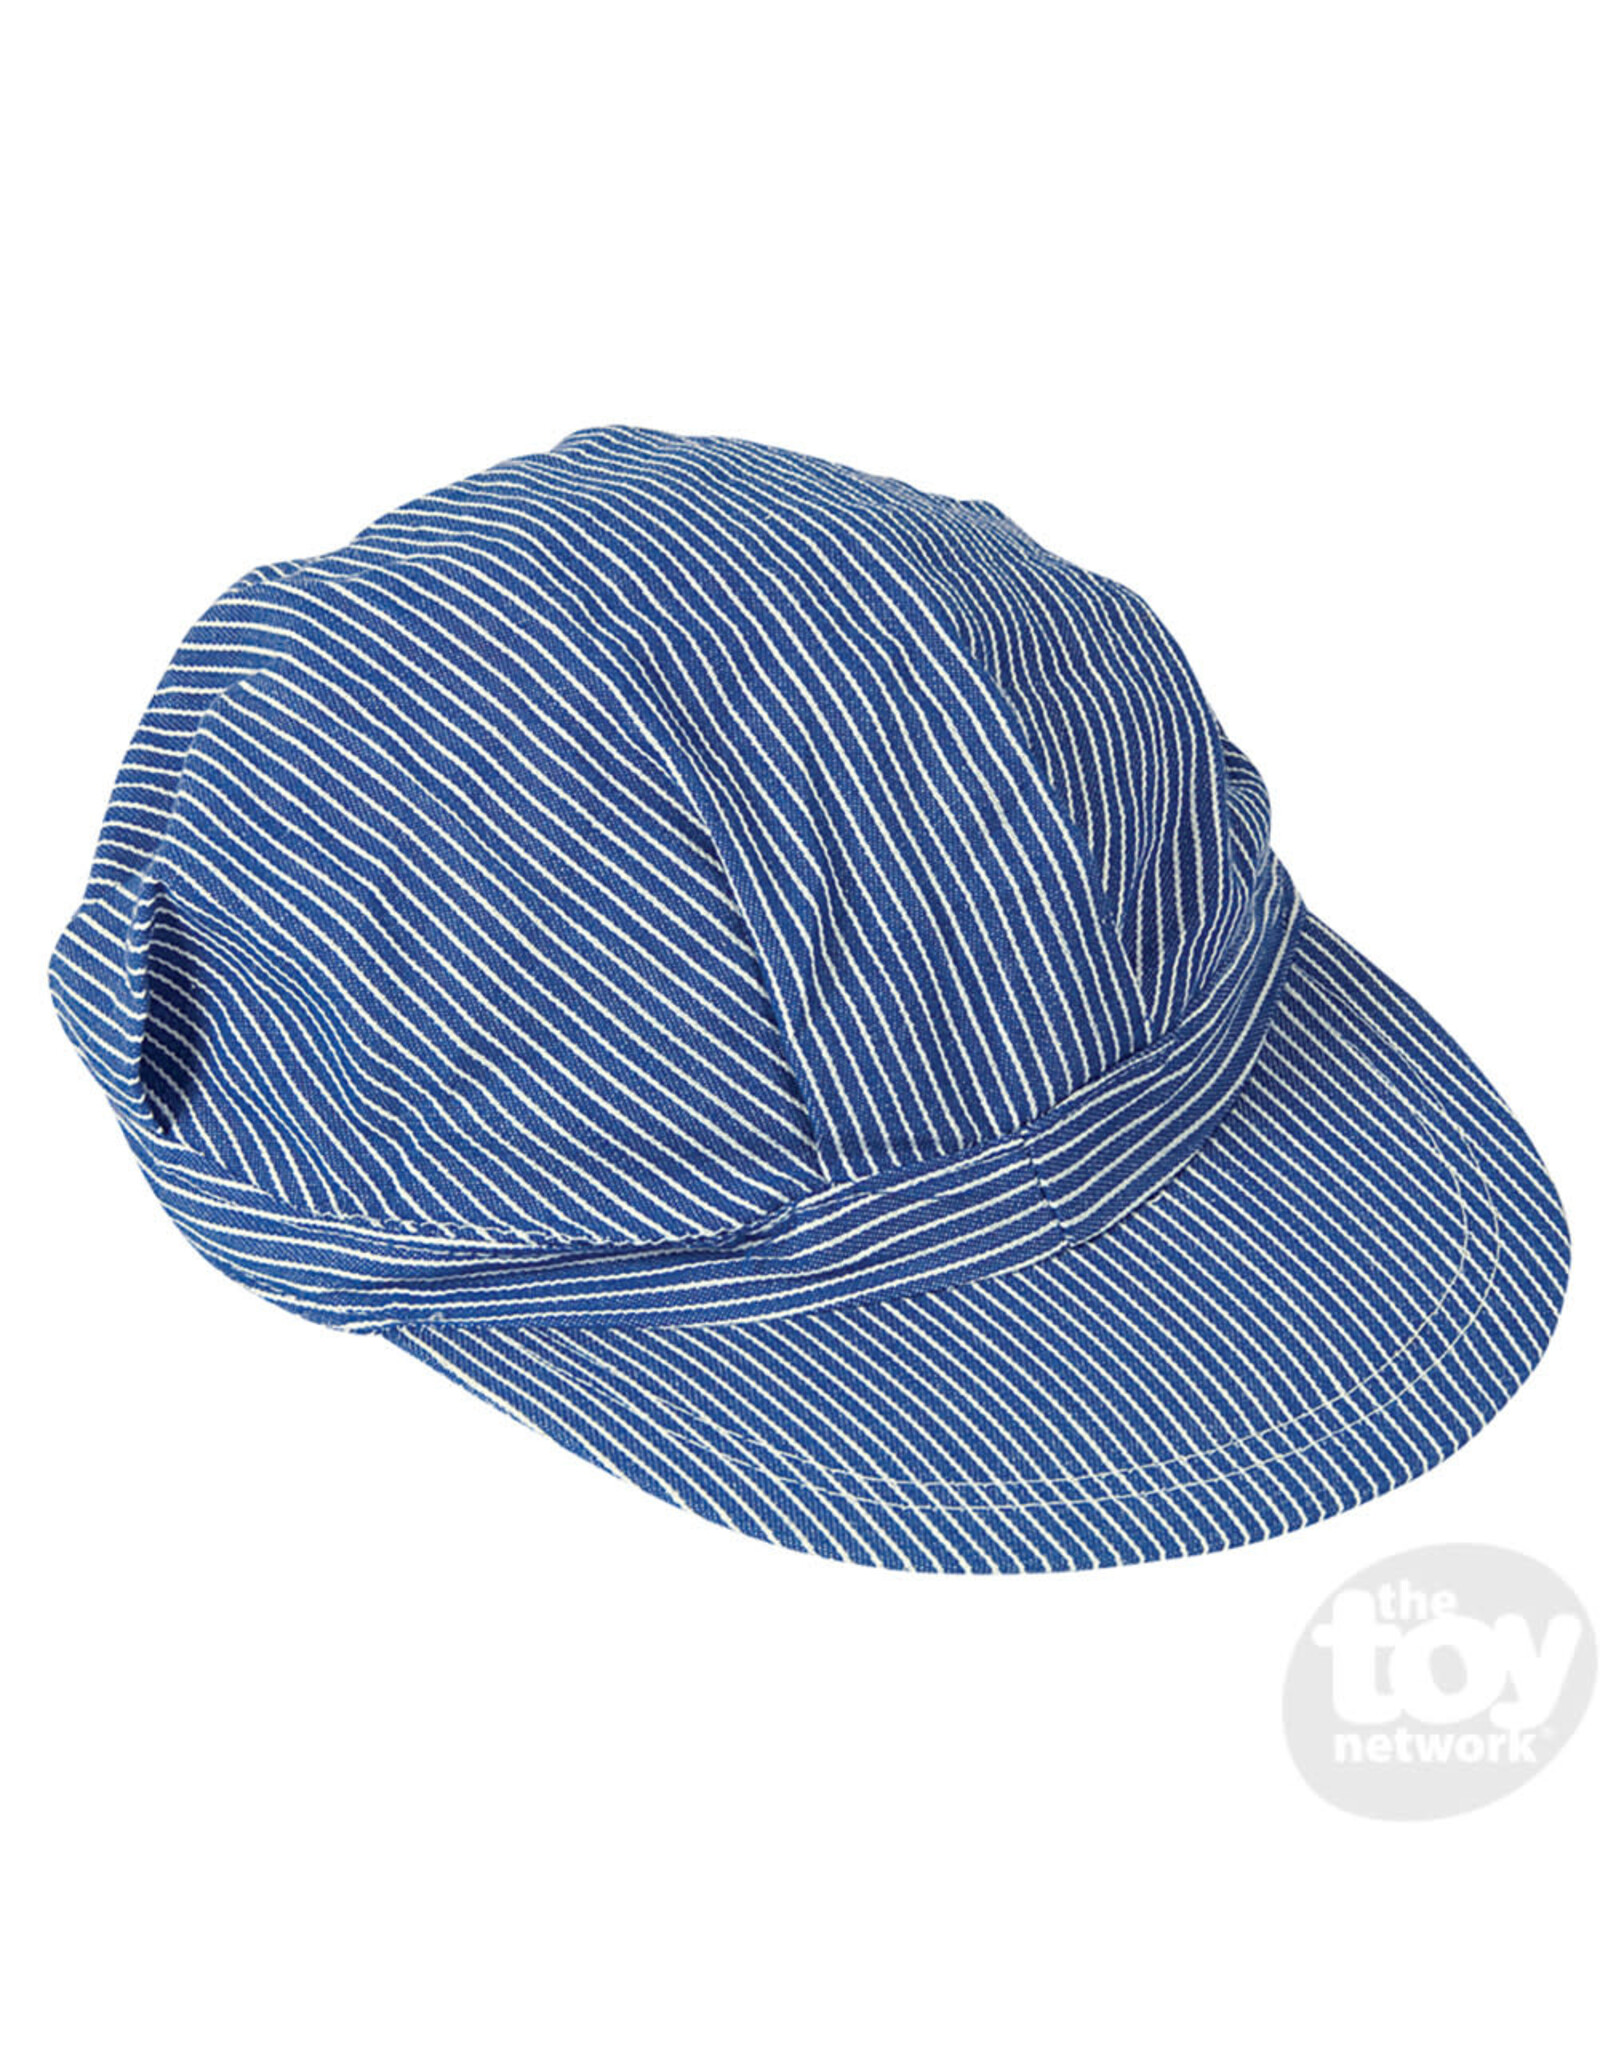 The Toy Network Child Size Blue Engineer Cap